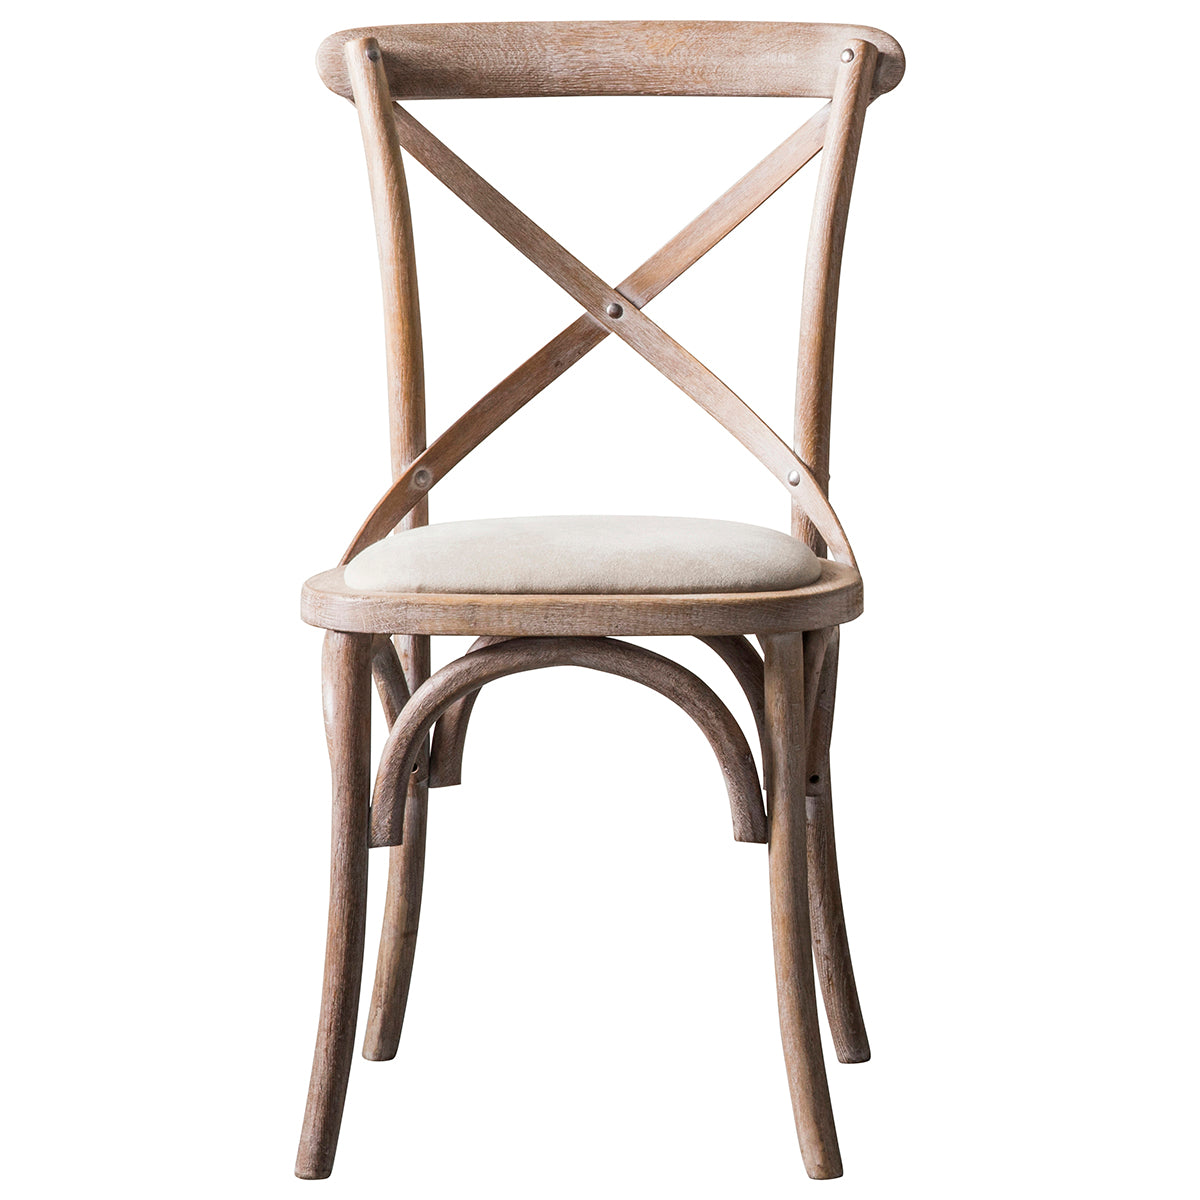 A wooden dining chair with a beige seat for home furniture or interior decor.